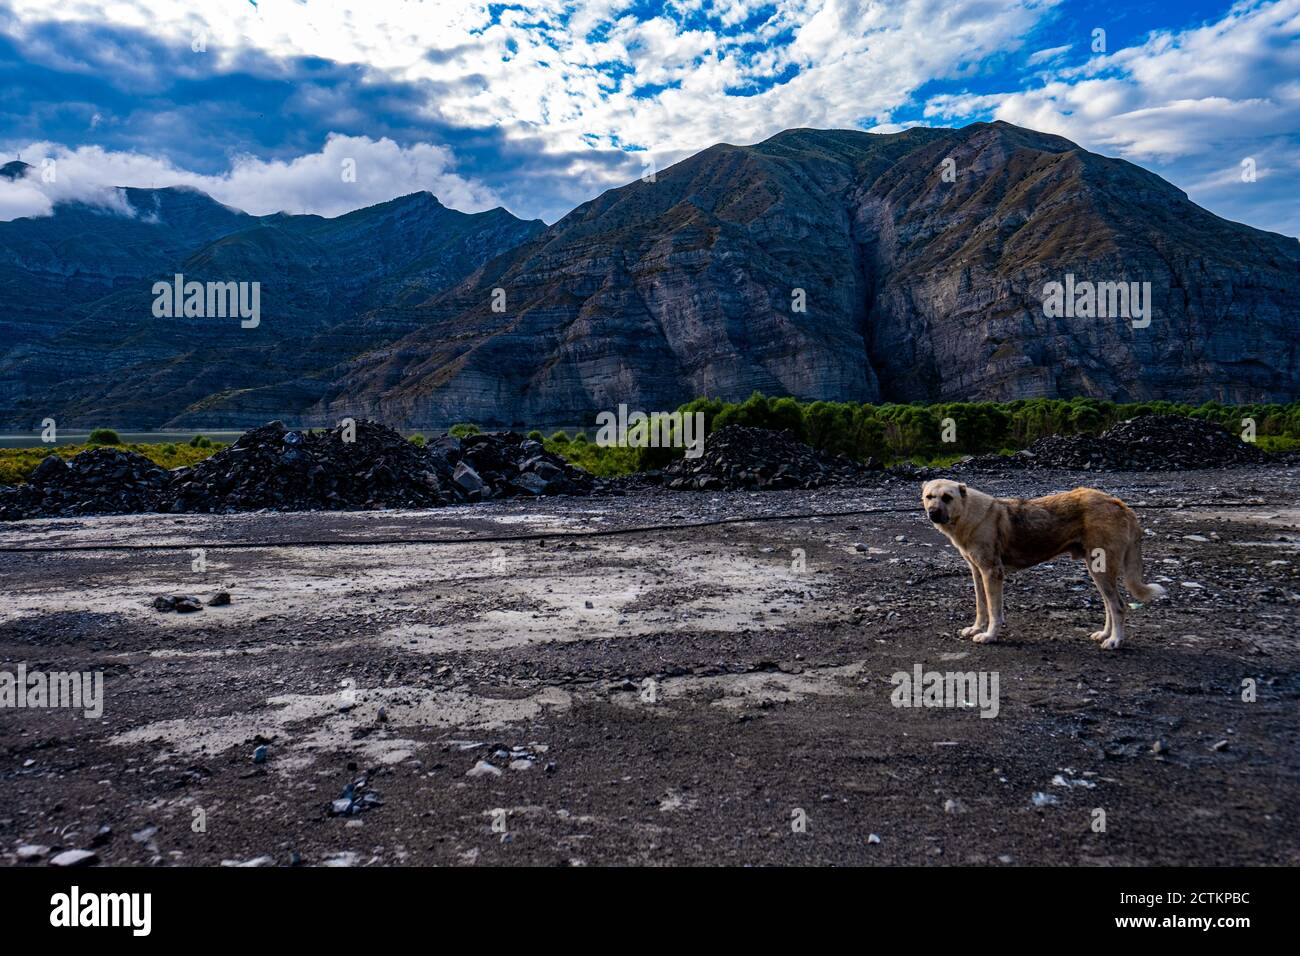 View of standing Anatolian shepherd with the background of a rocky mountain Stock Photo